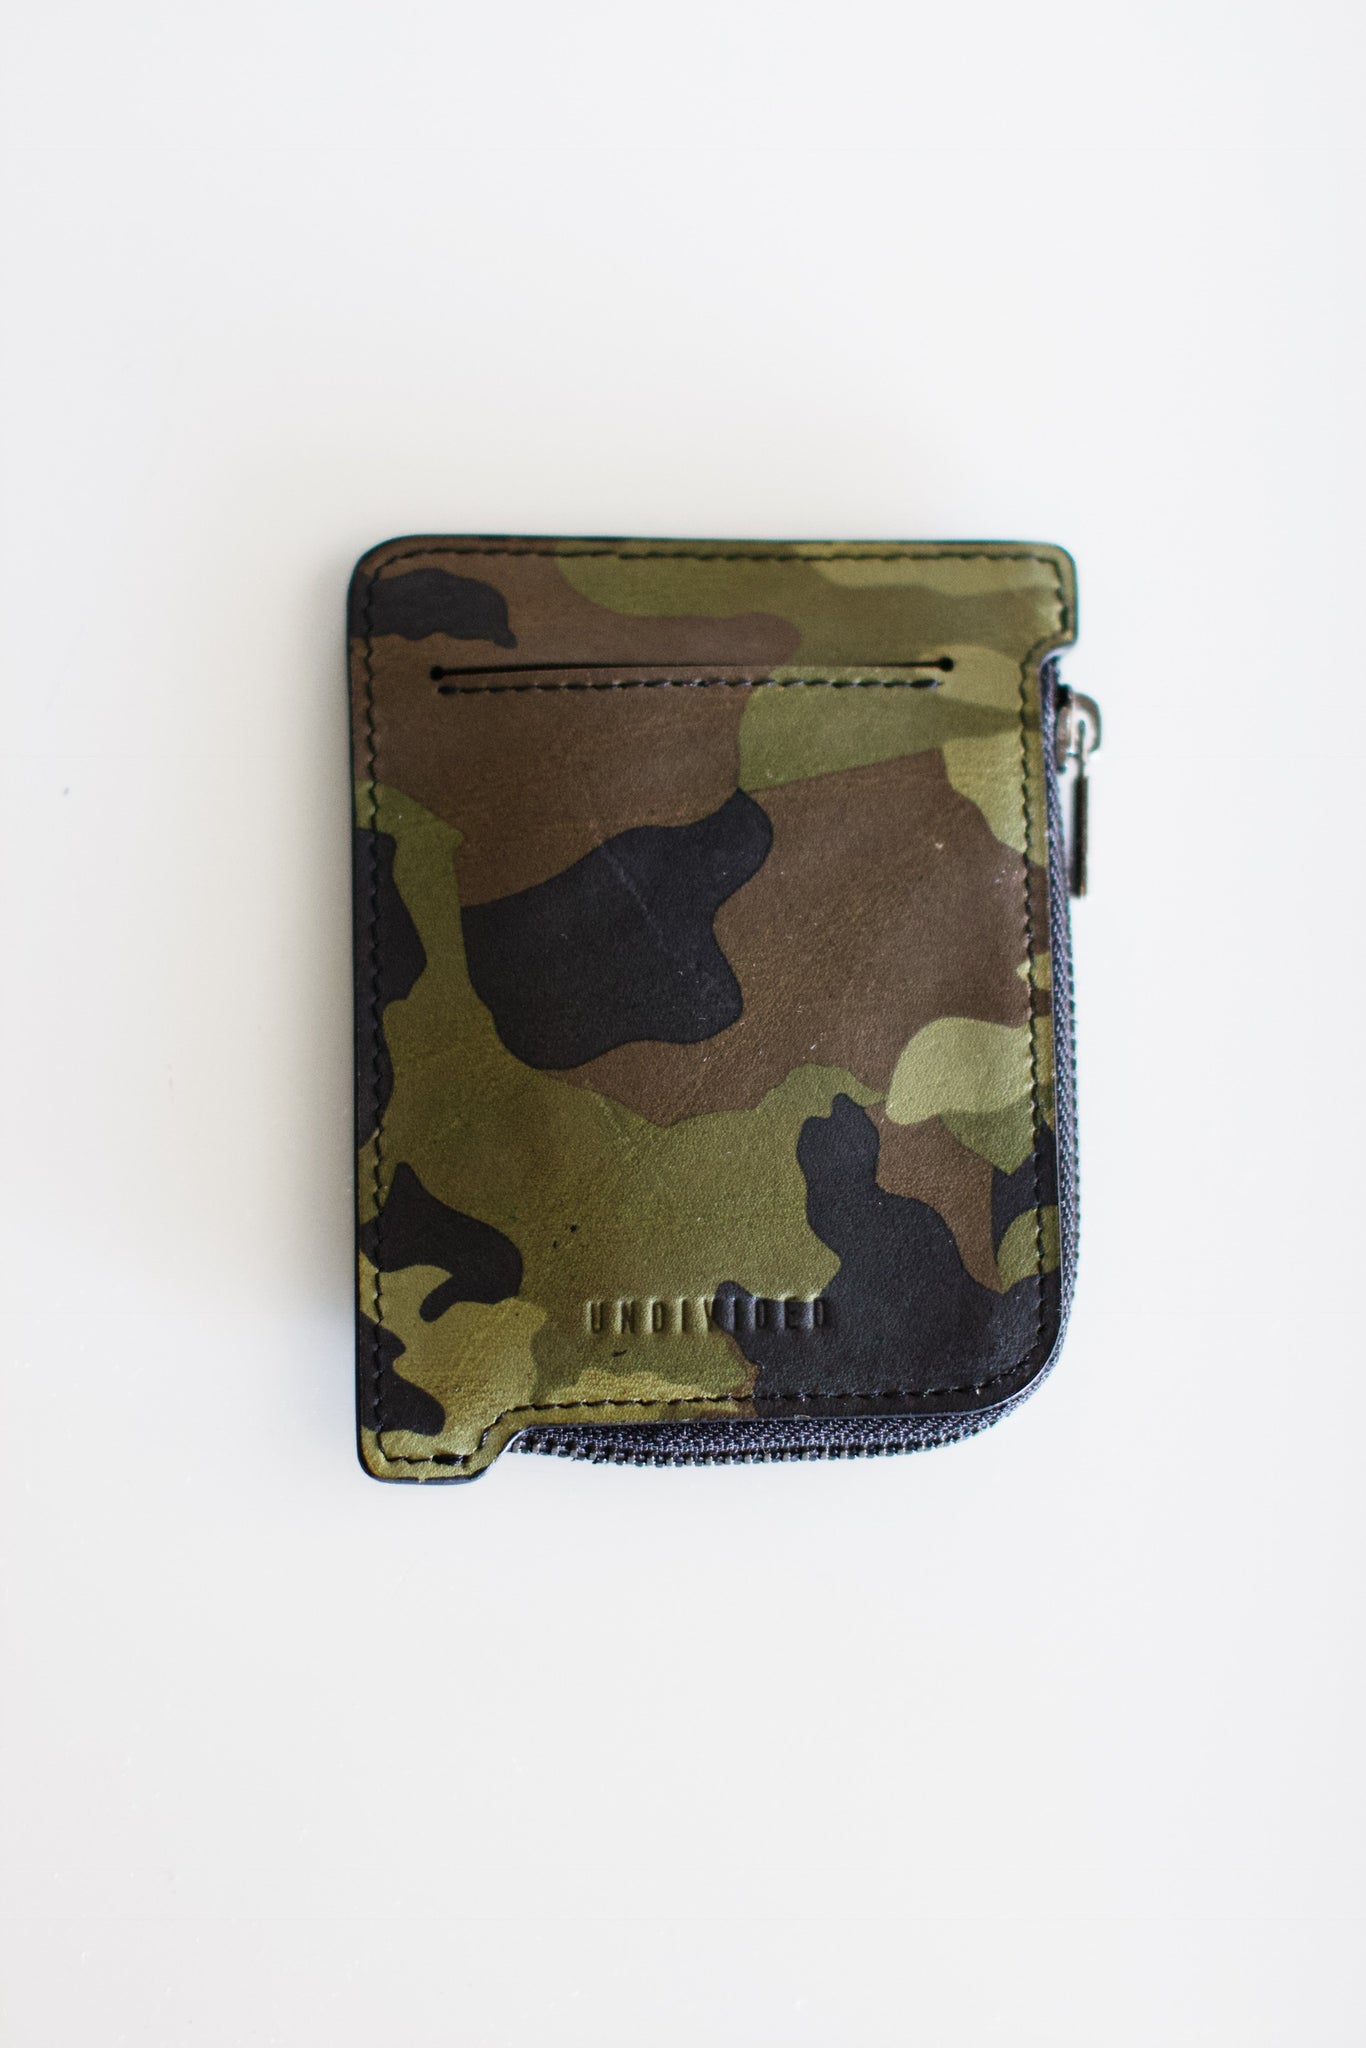 New Army Camouflage Mini Men's Leather Wallet With Coin Pocket